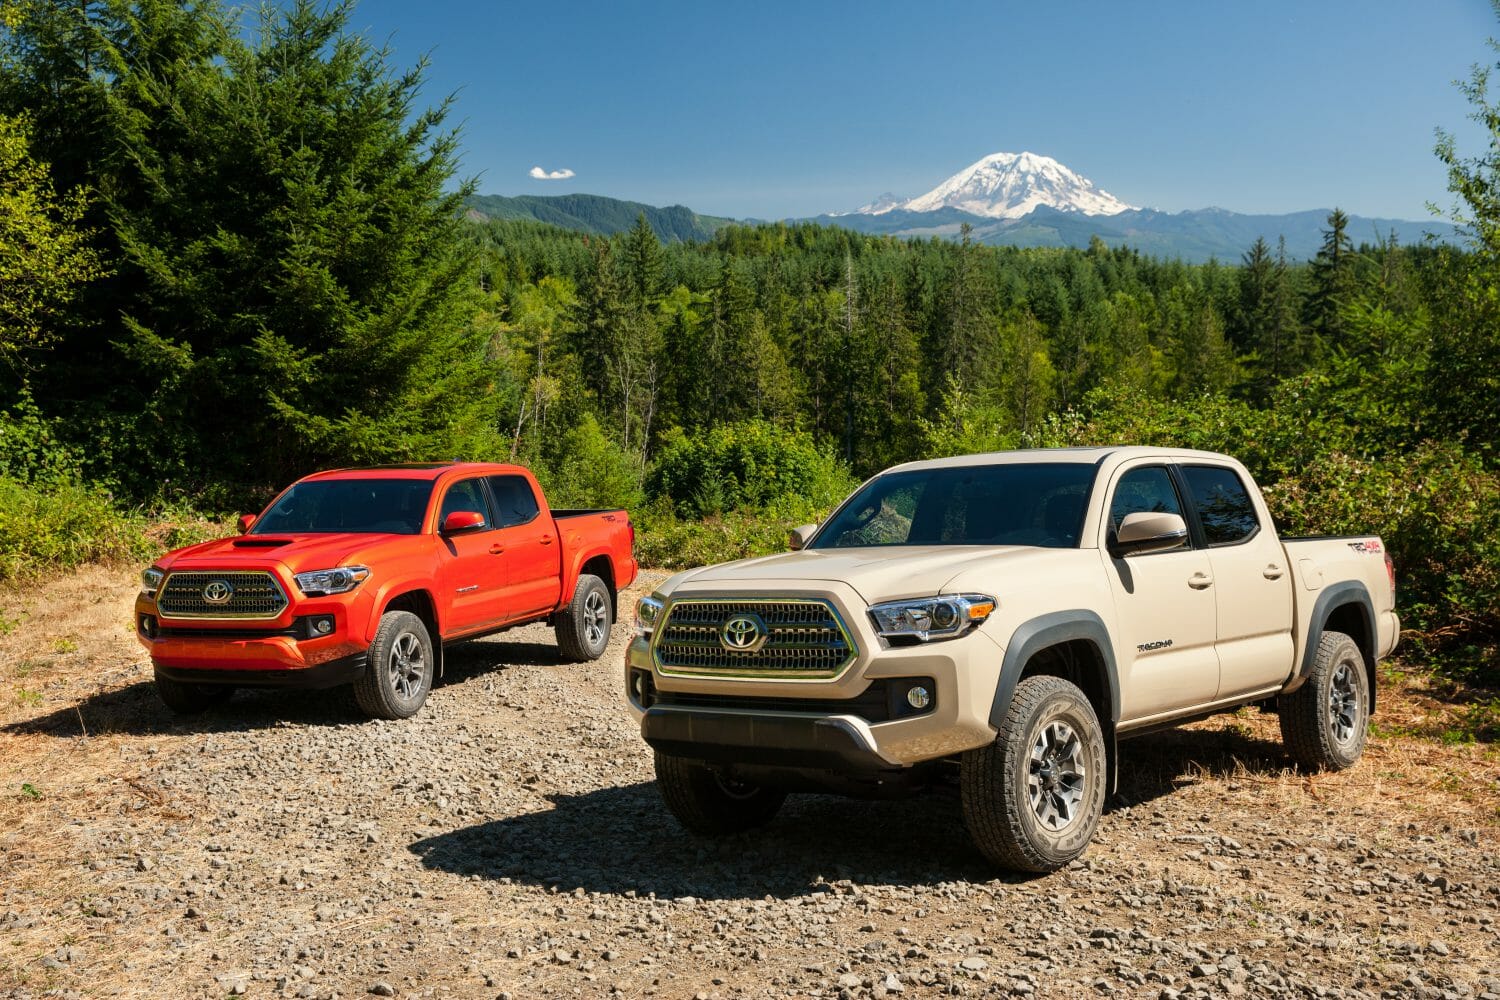 2016 Toyota Tacoma Review: A Reliable Class-Leading Compact Truck